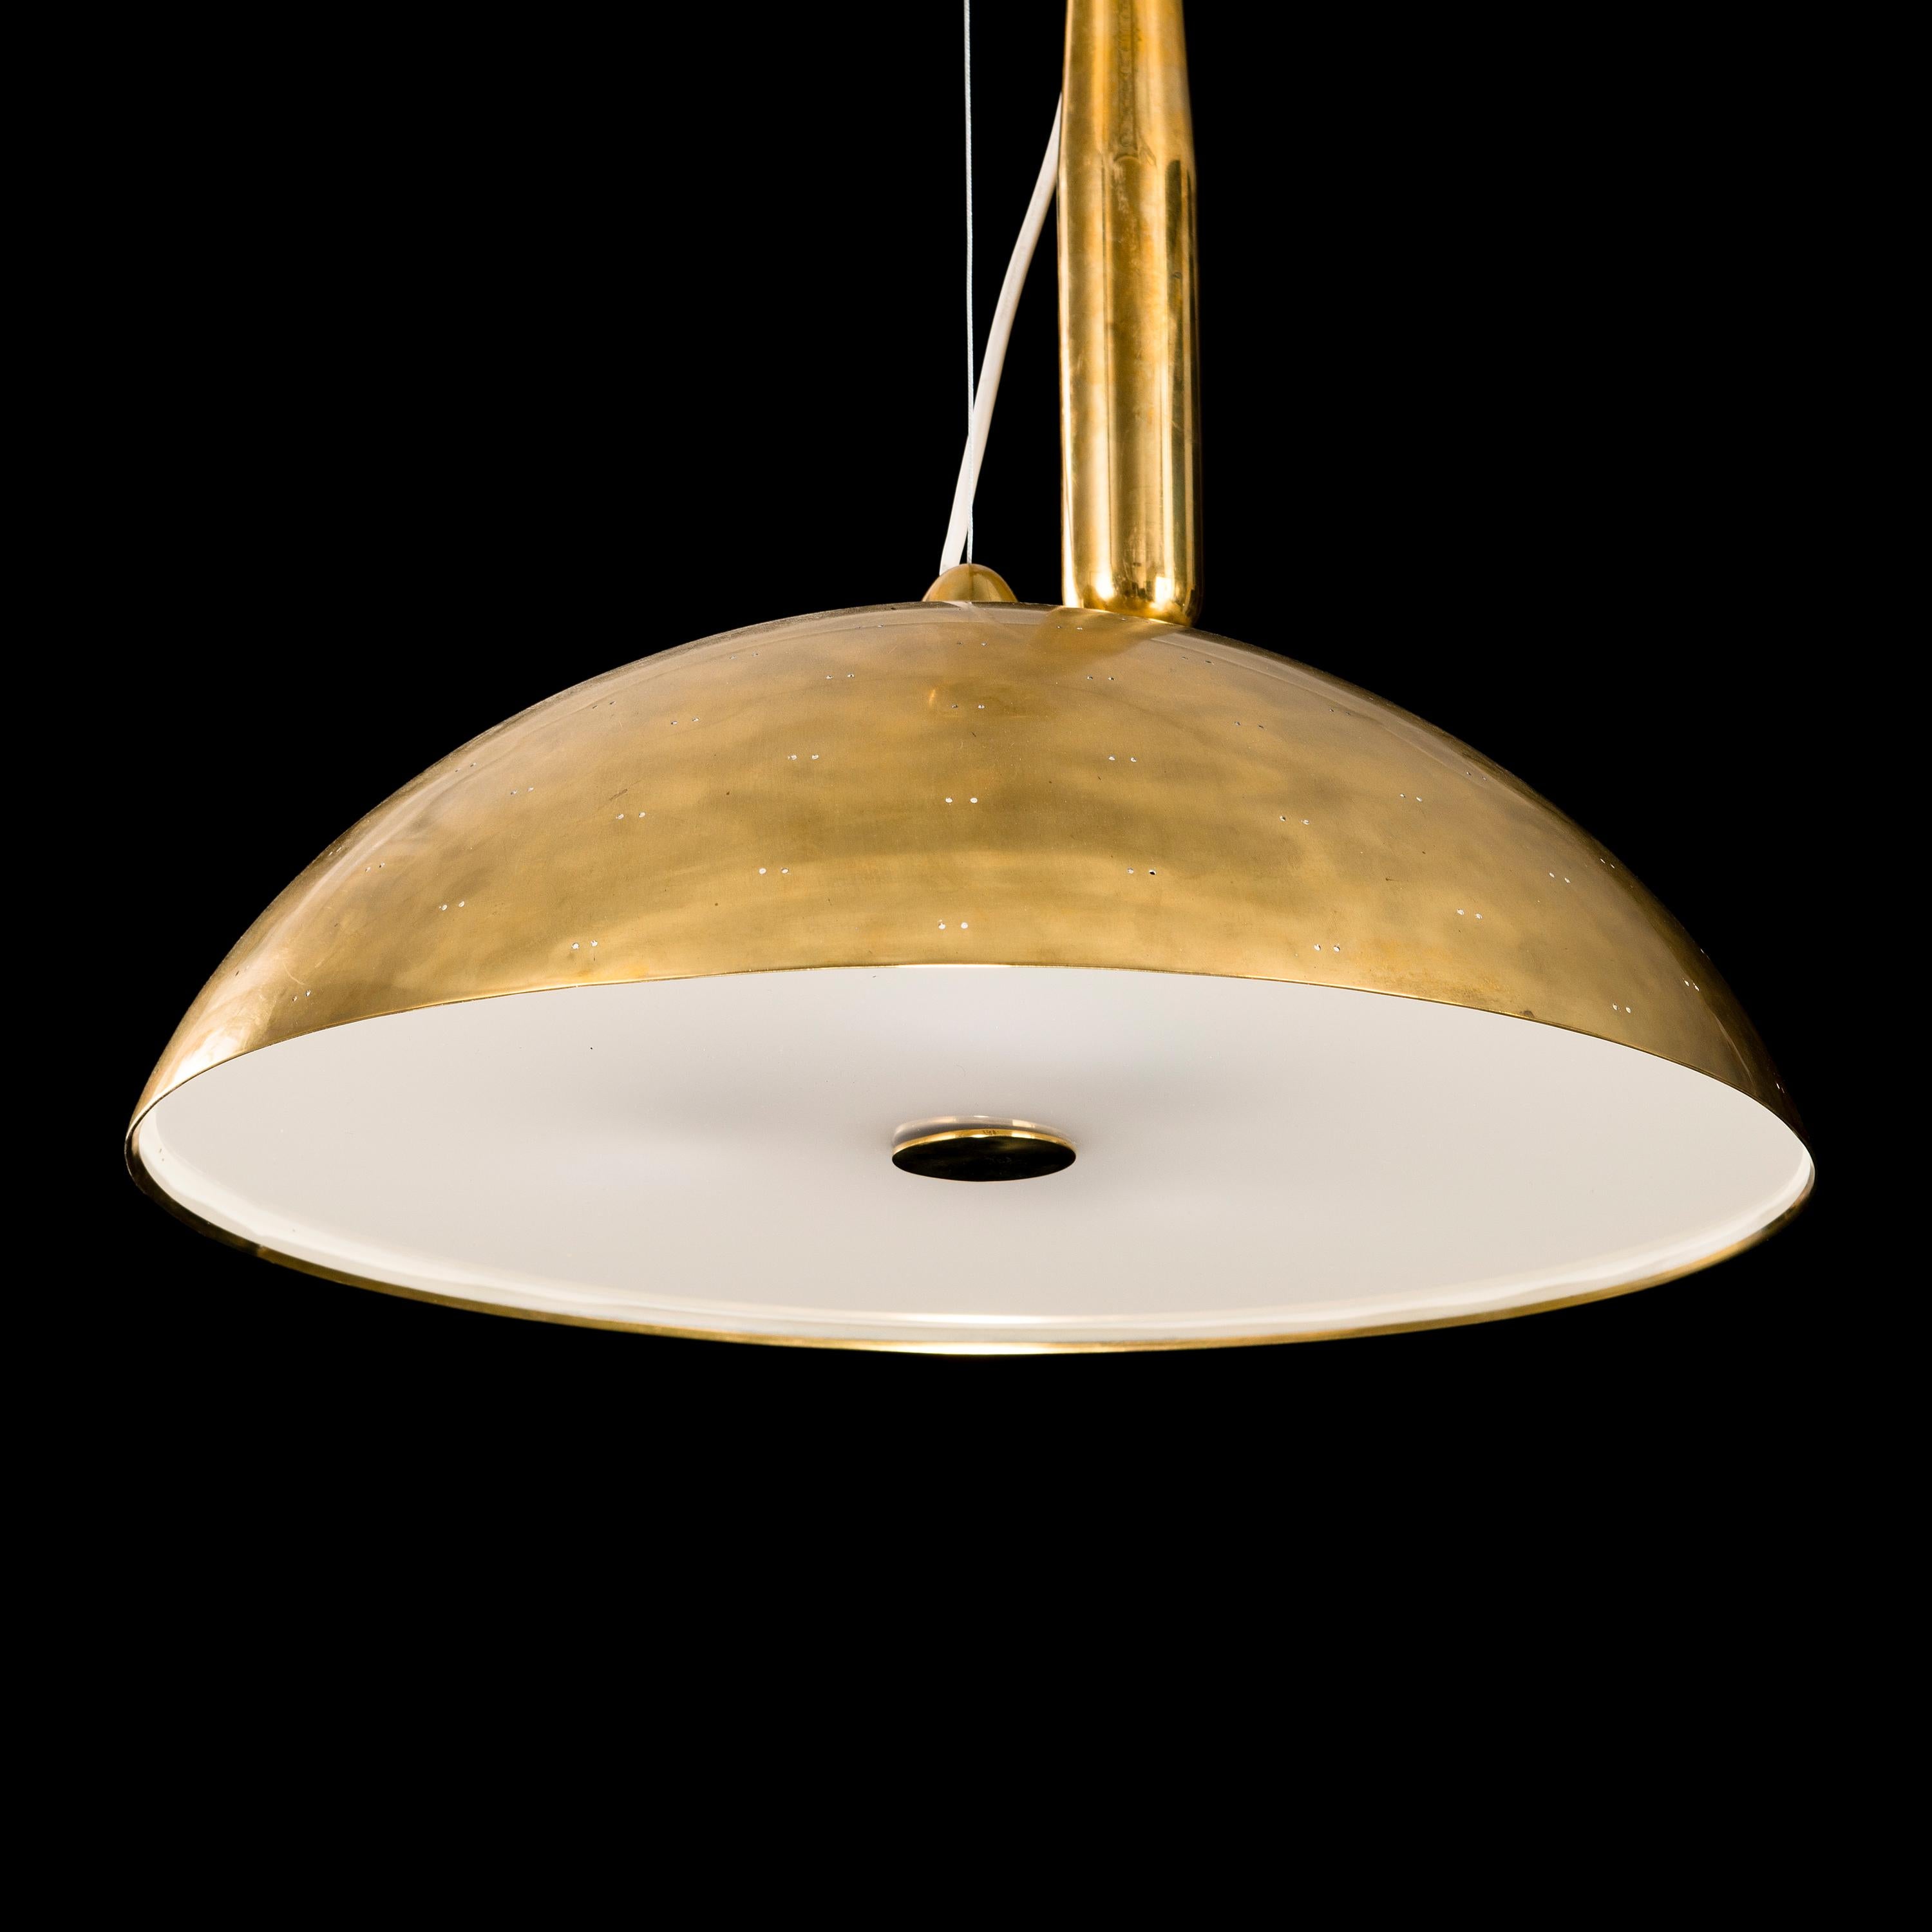 Finnish Paavo Tynell Bras Pendant Light Mod 1965 with Adjustable Counterweight For Sale